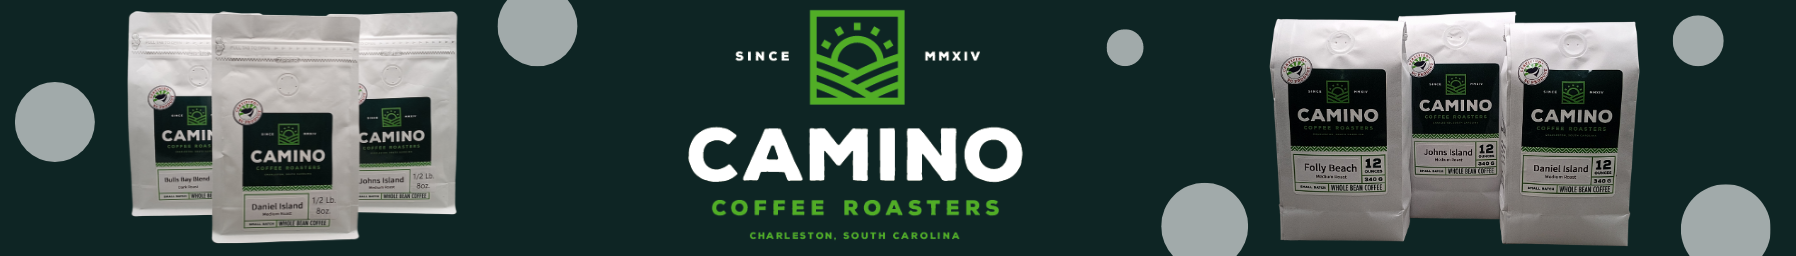 CAMINO COOFEE ROASTERS - New supplier on Syncee Marketplace